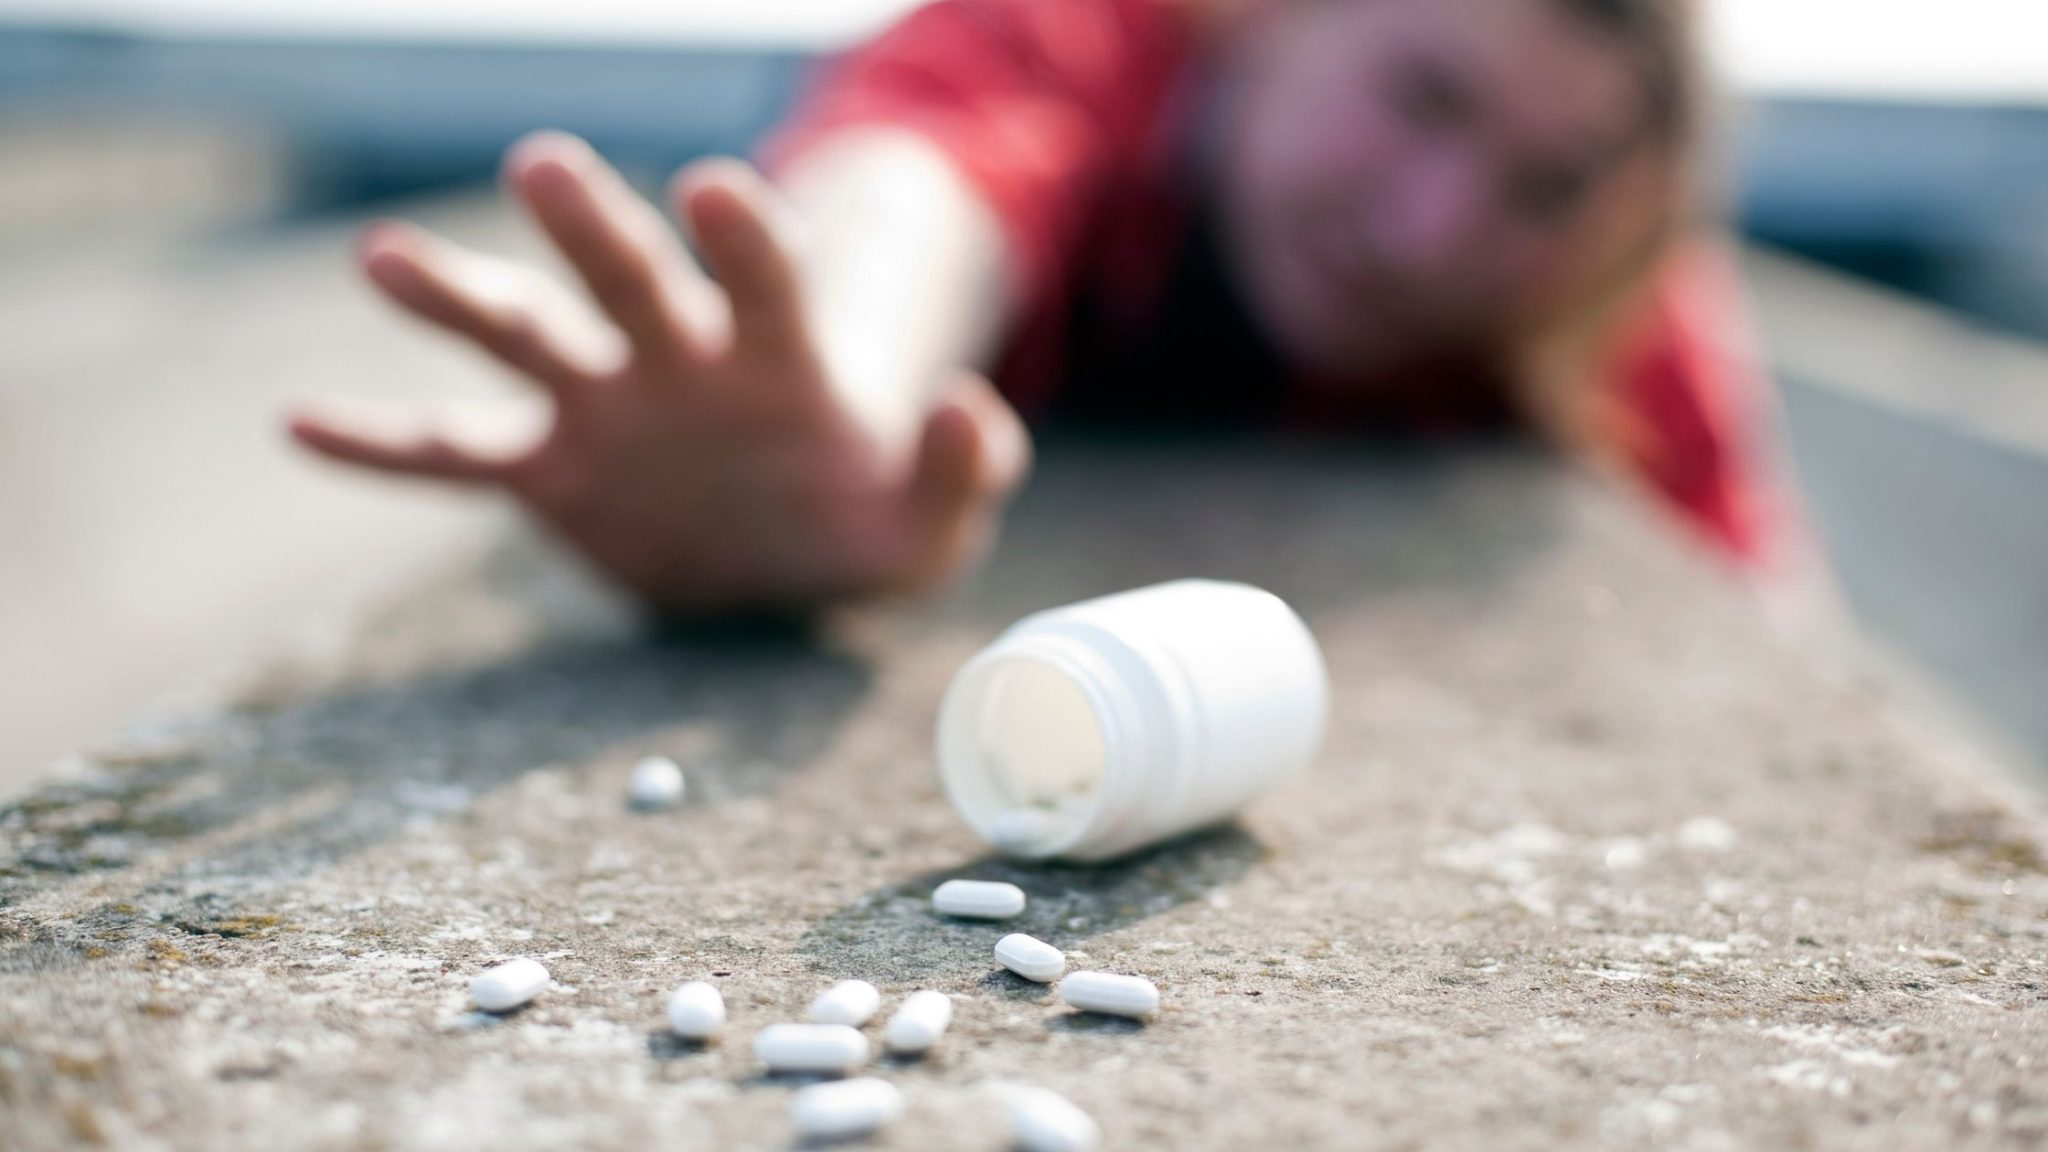 Reaching for pills to feel normal can indicate an opioid dependence